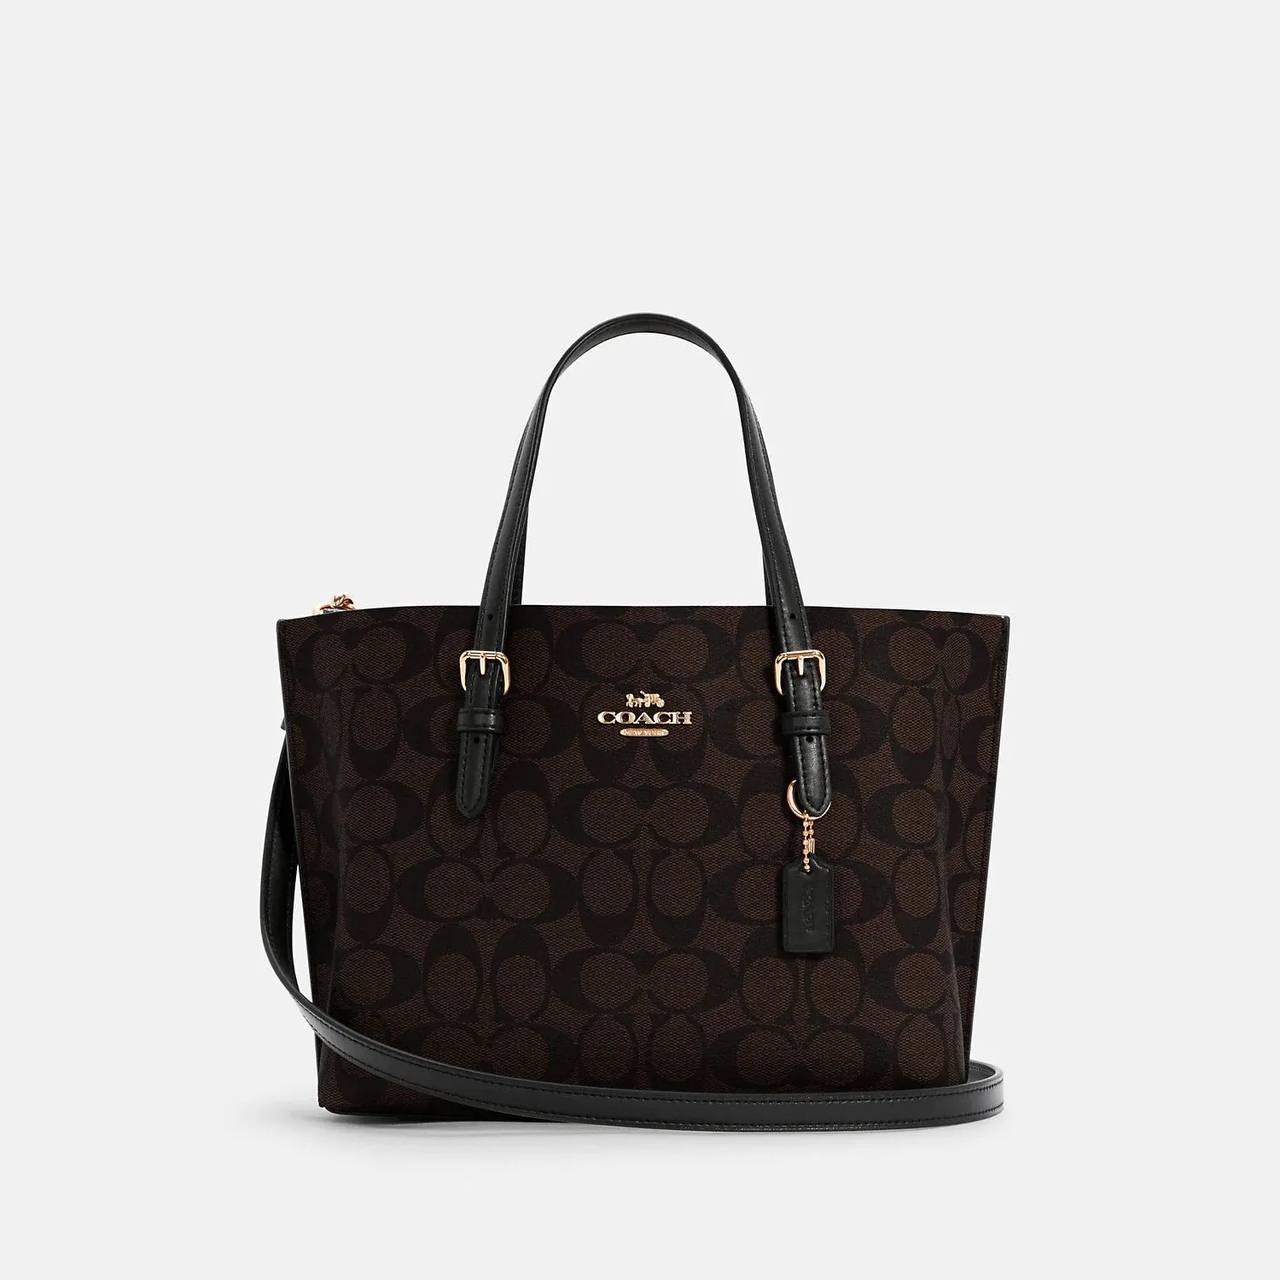 Coach mollie 25 in signature brown black - Amory